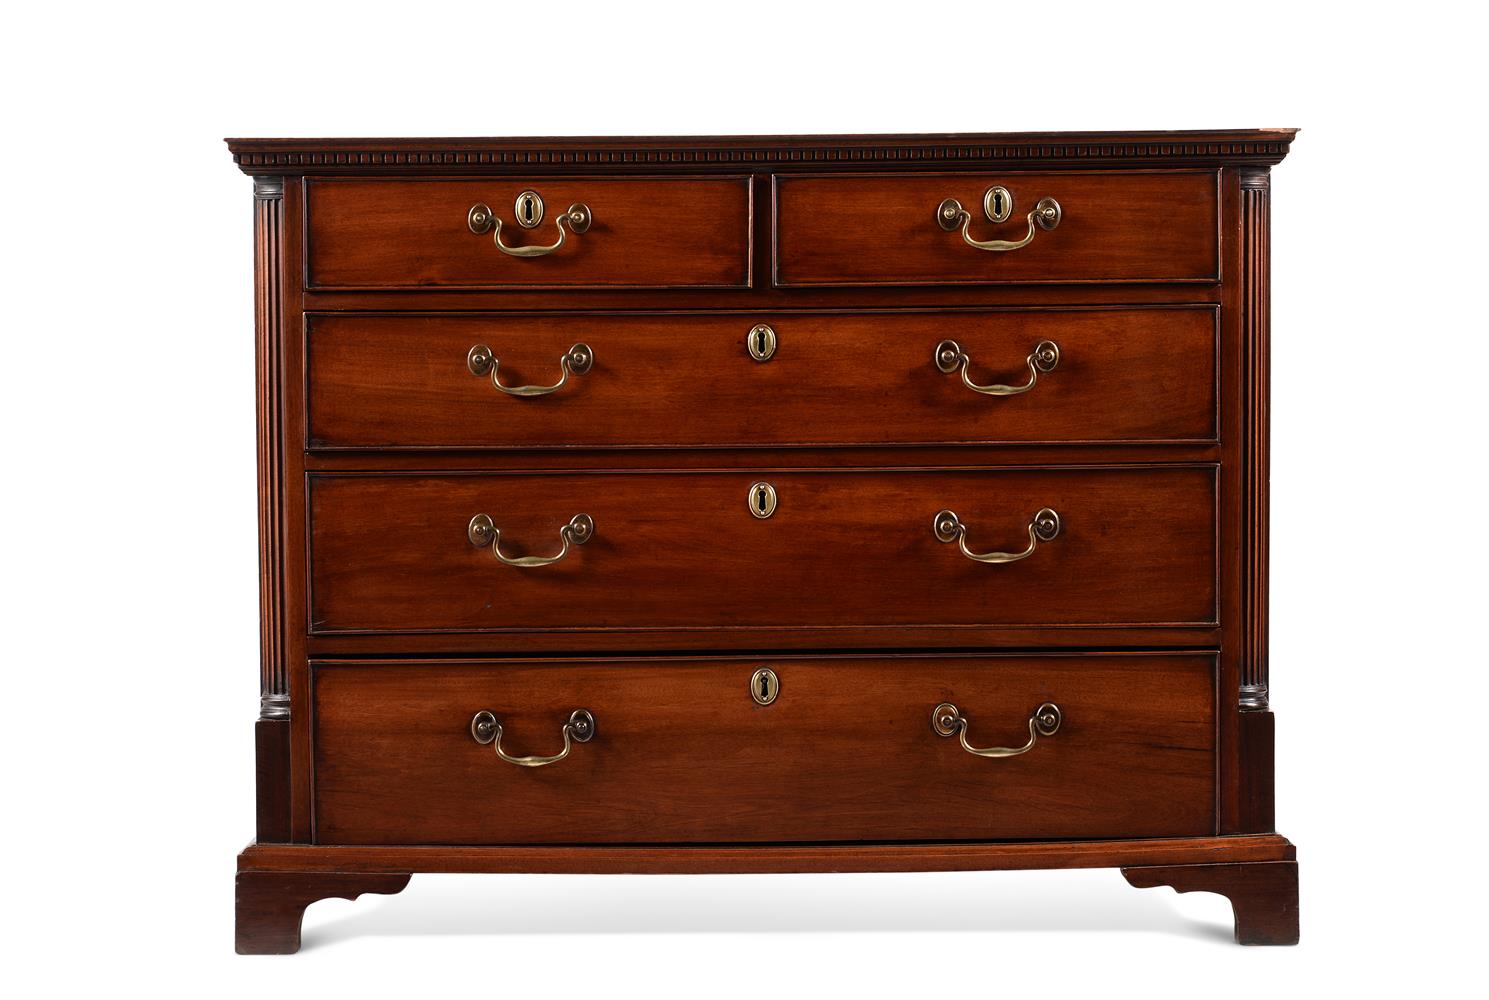 A GEORGE III EXOTIC HARDWOOD CHEST OF DRAWERS, OF NORTH COUNTRY TYPE, CIRCA 1770